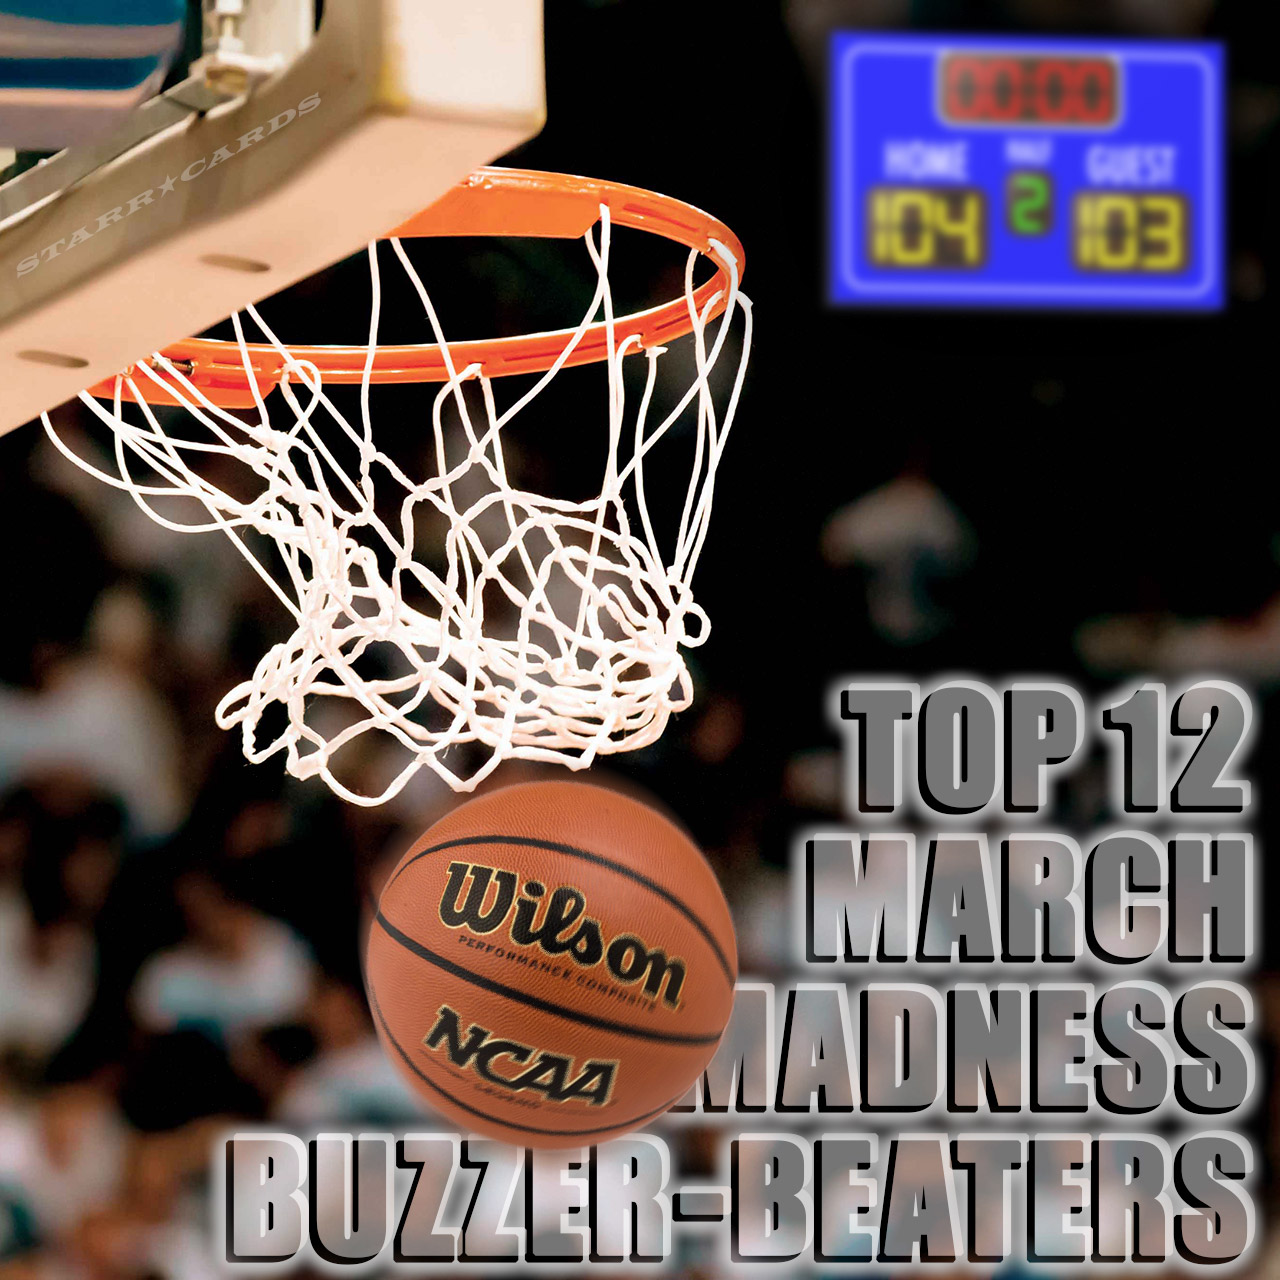 Top 12 March Madness buzzerbeaters of all time topped by "The Shot"